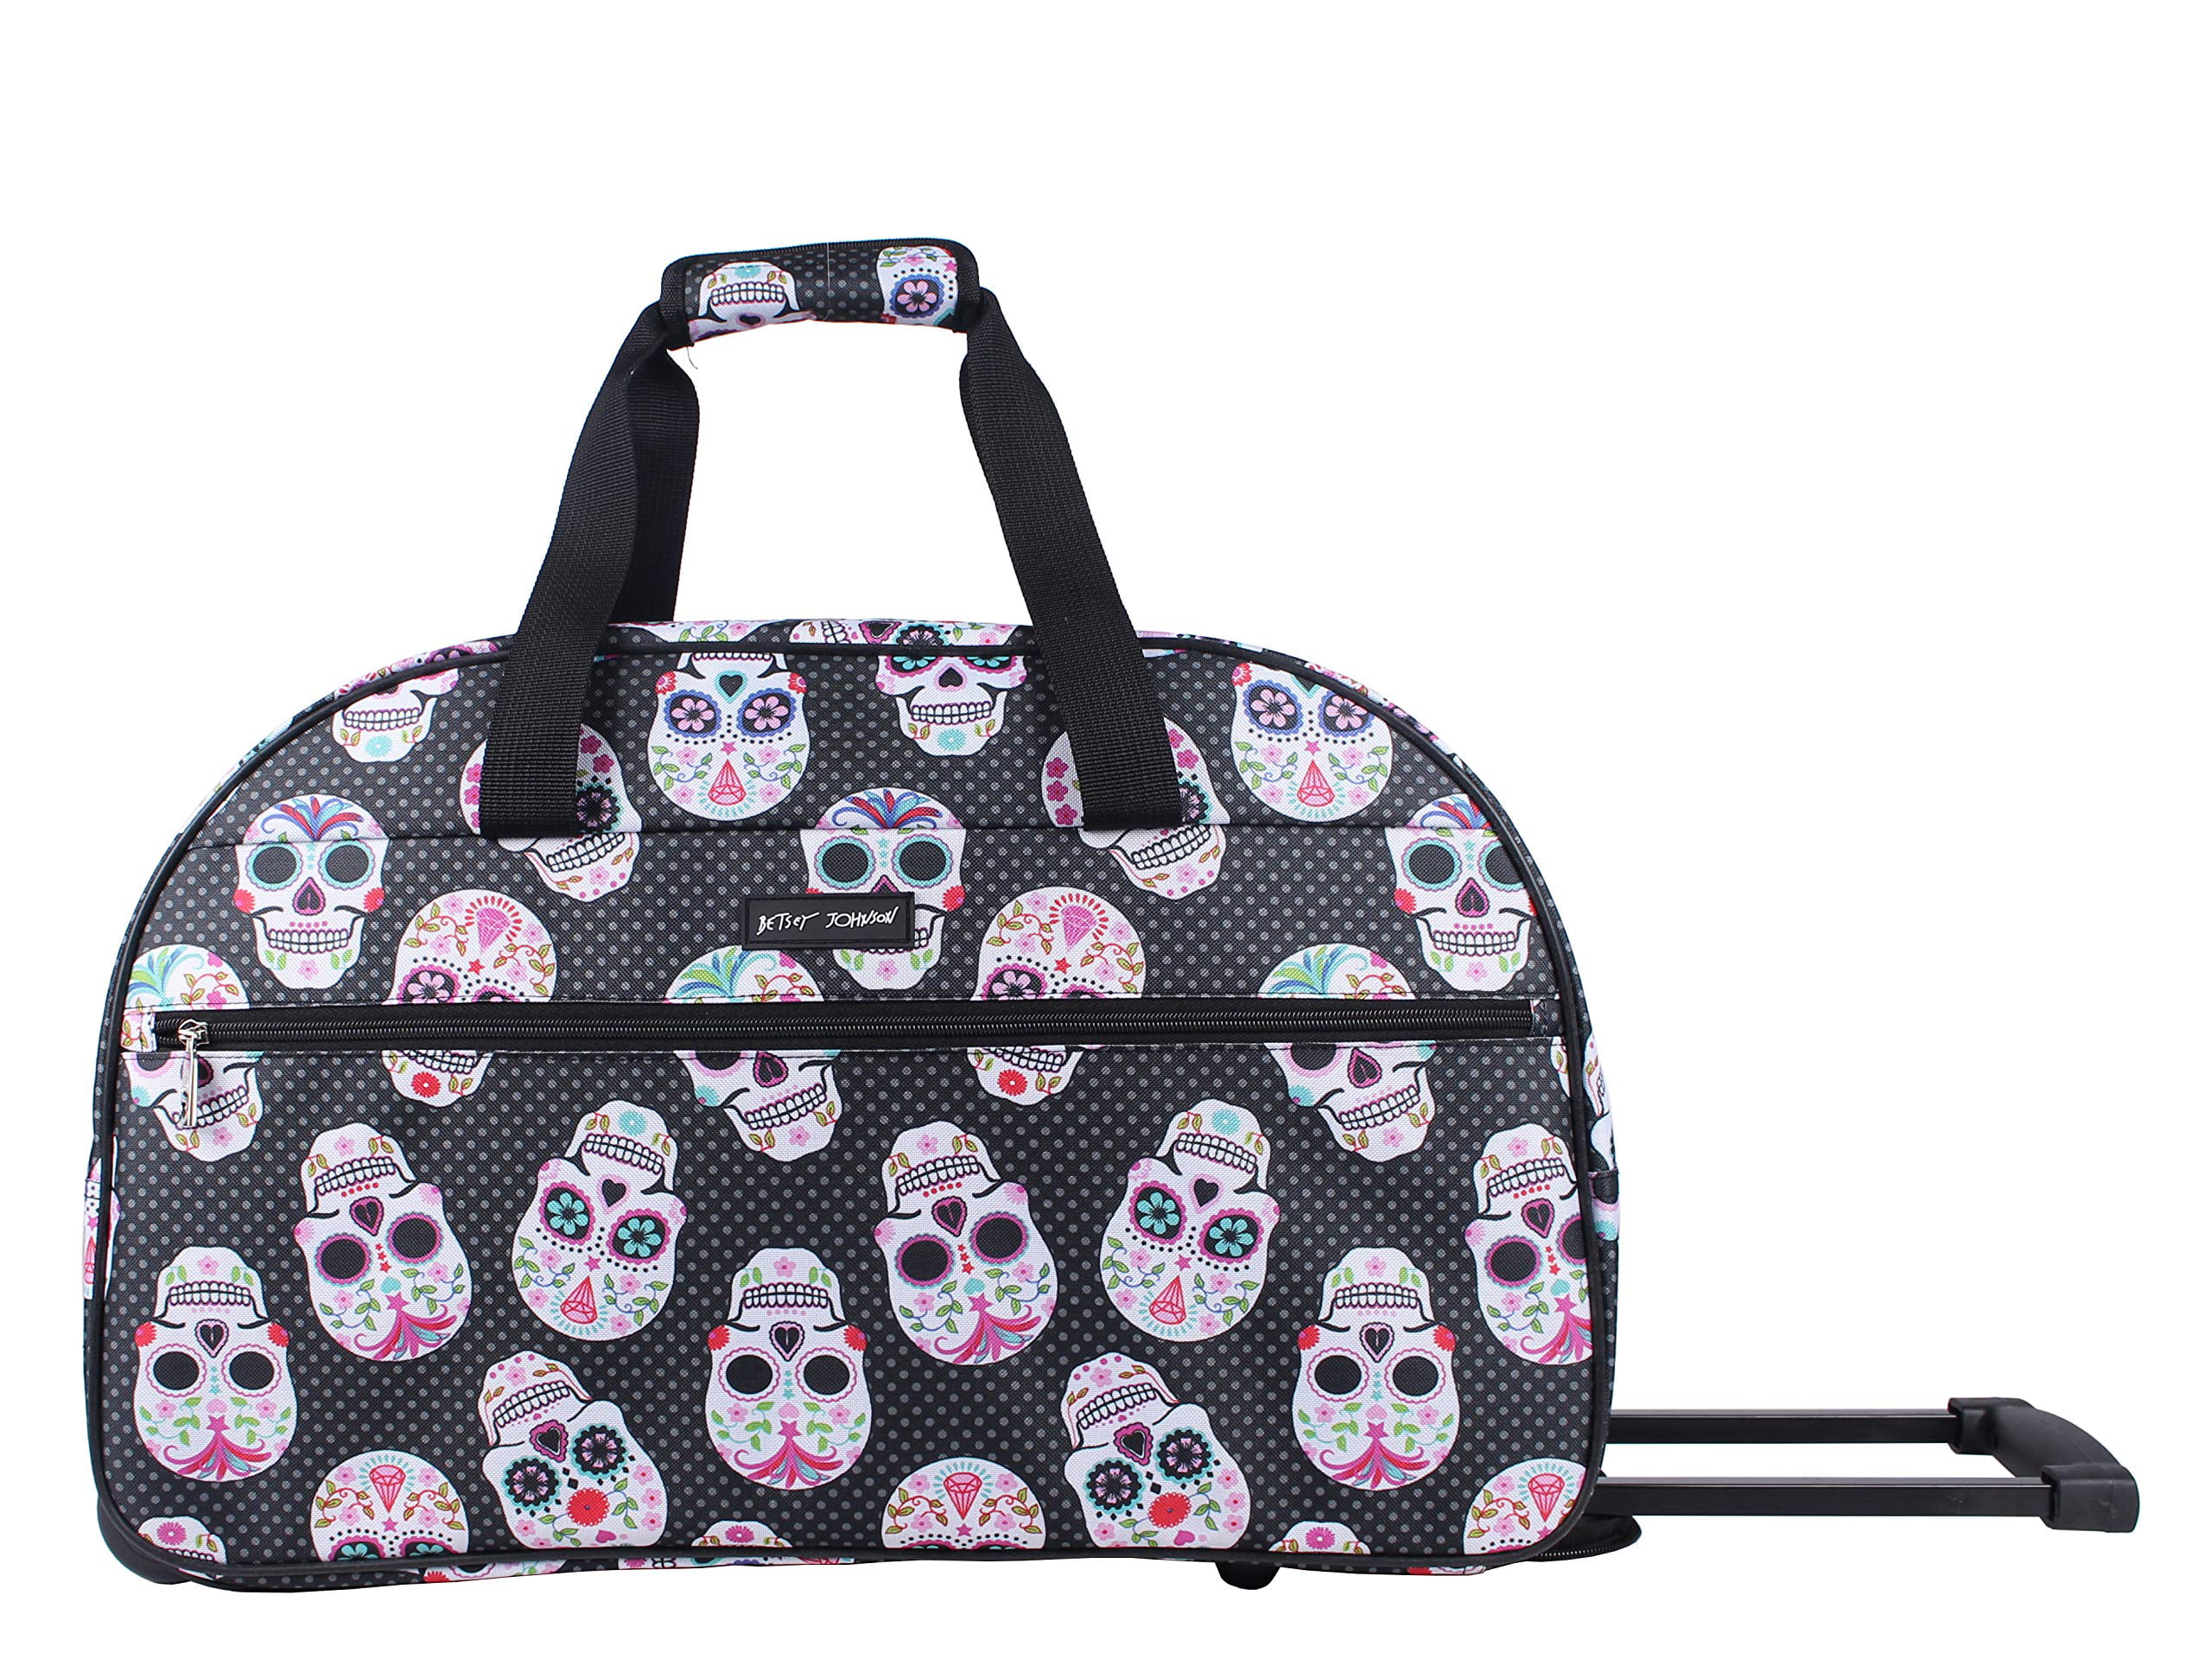 Betsey Johnson Designer Carry On Luggage Collection Lightweight Pattern  22 Inch Duffel Bag- Weekender Overnight Business Travel Suitcase with 2-  Rol